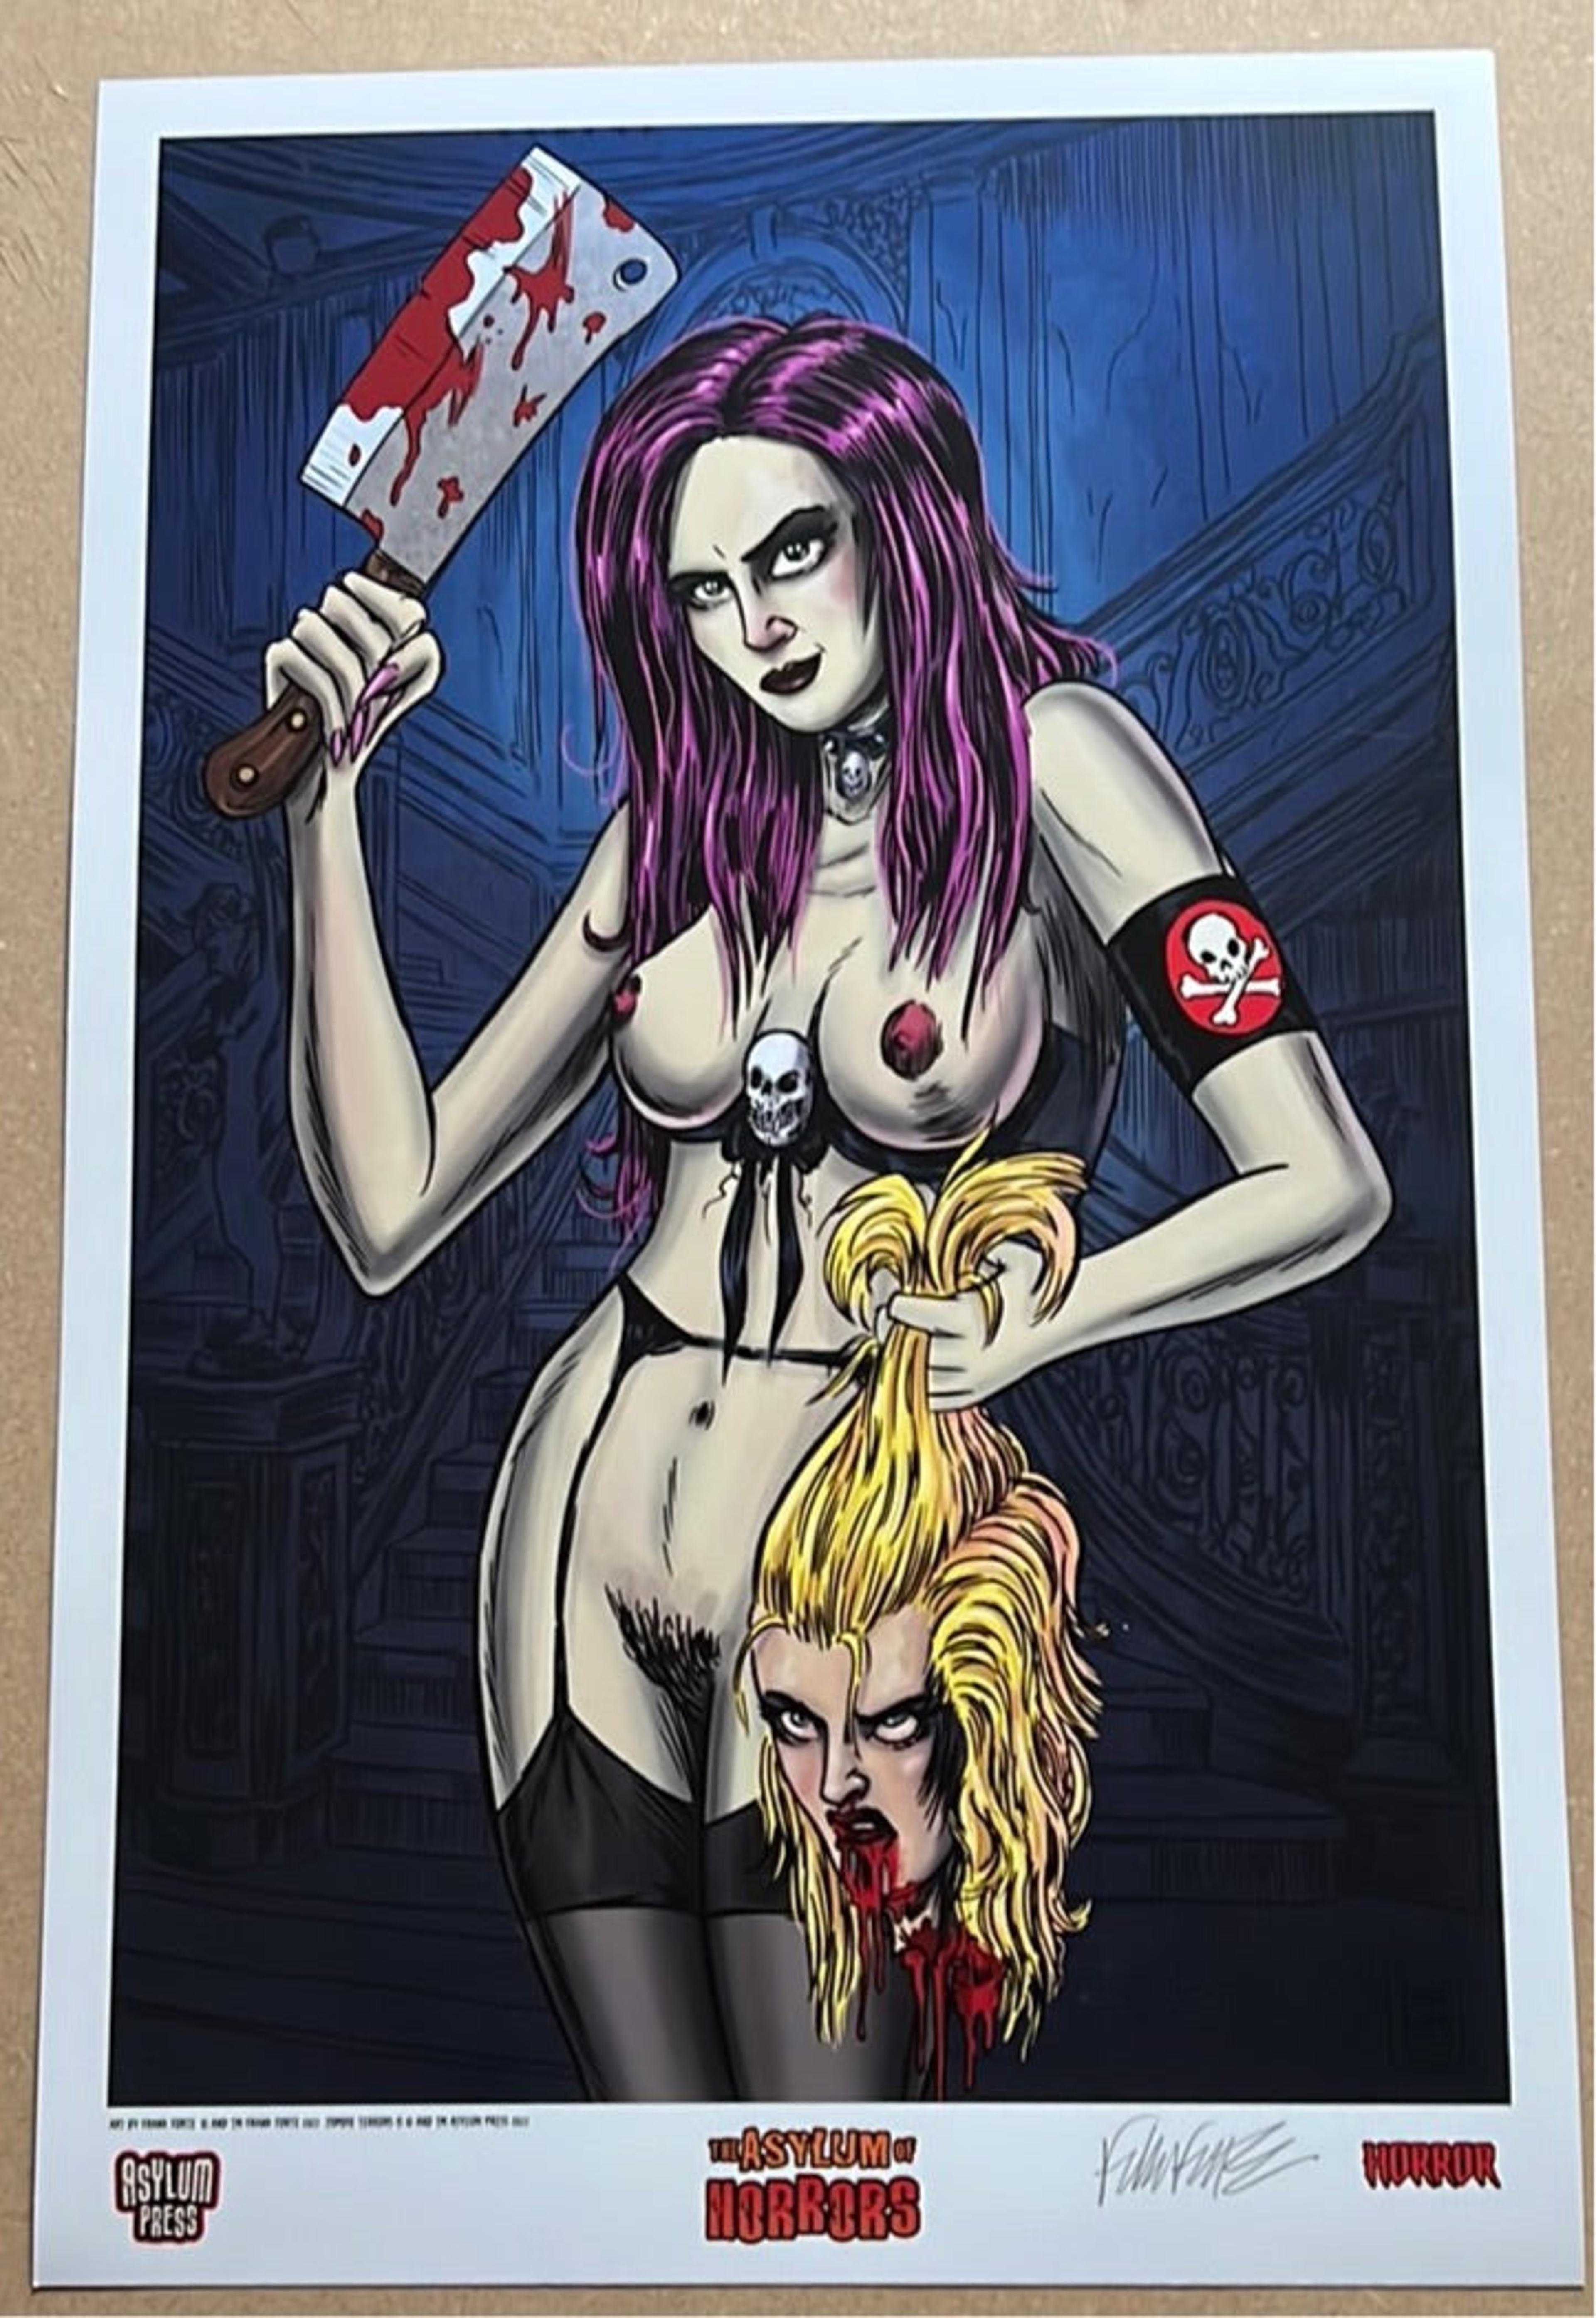 “Headless Risque” Asylum of Horrors 11x17 Print by Frank For